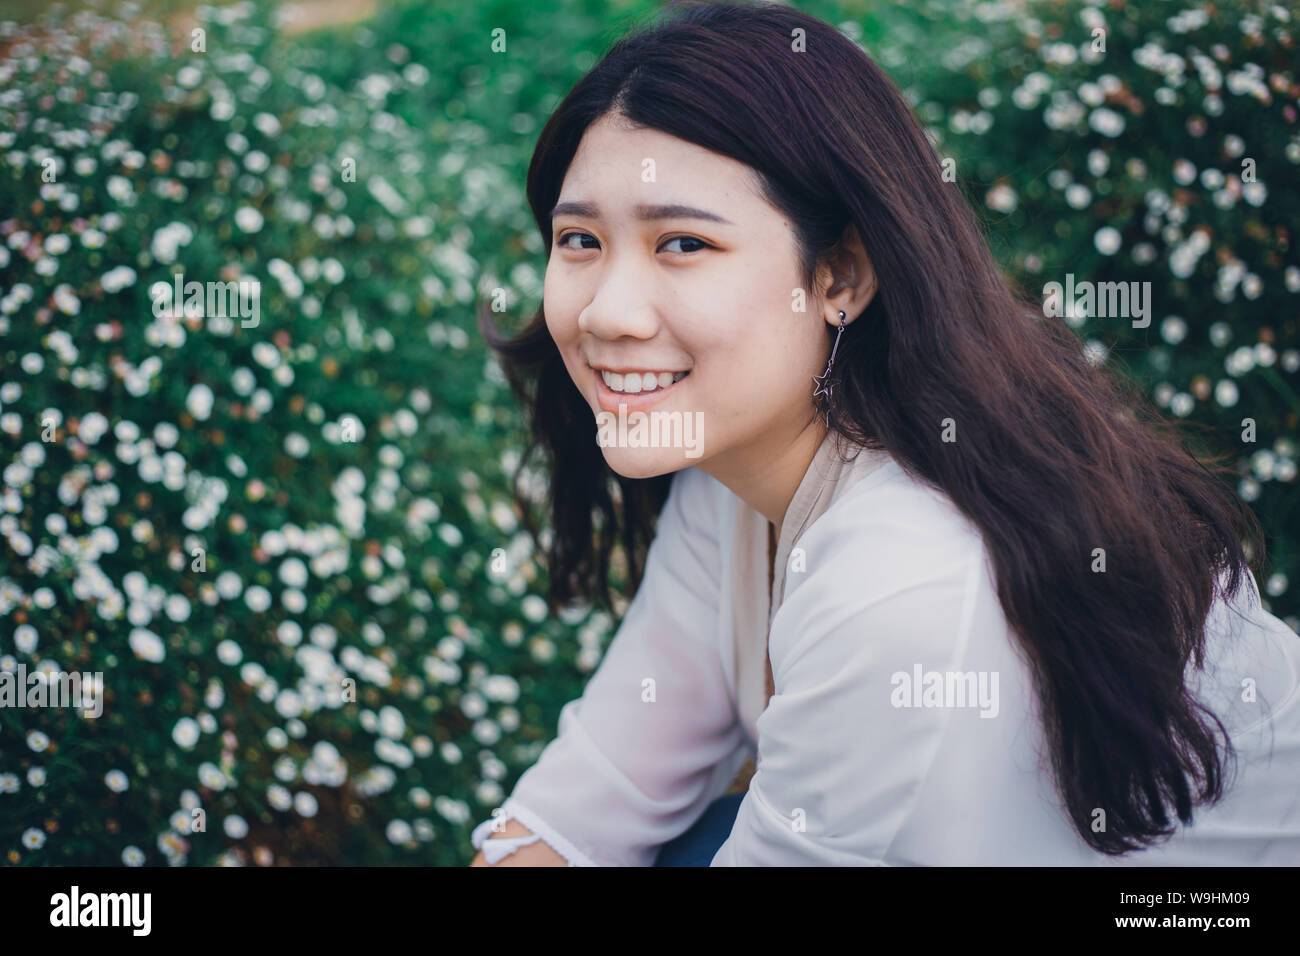 Cute Asian Fat Teen Girl Young Smiling With Healthy Teeth In The Garden Flower Field Vintage Color Tone Stock Photo Alamy